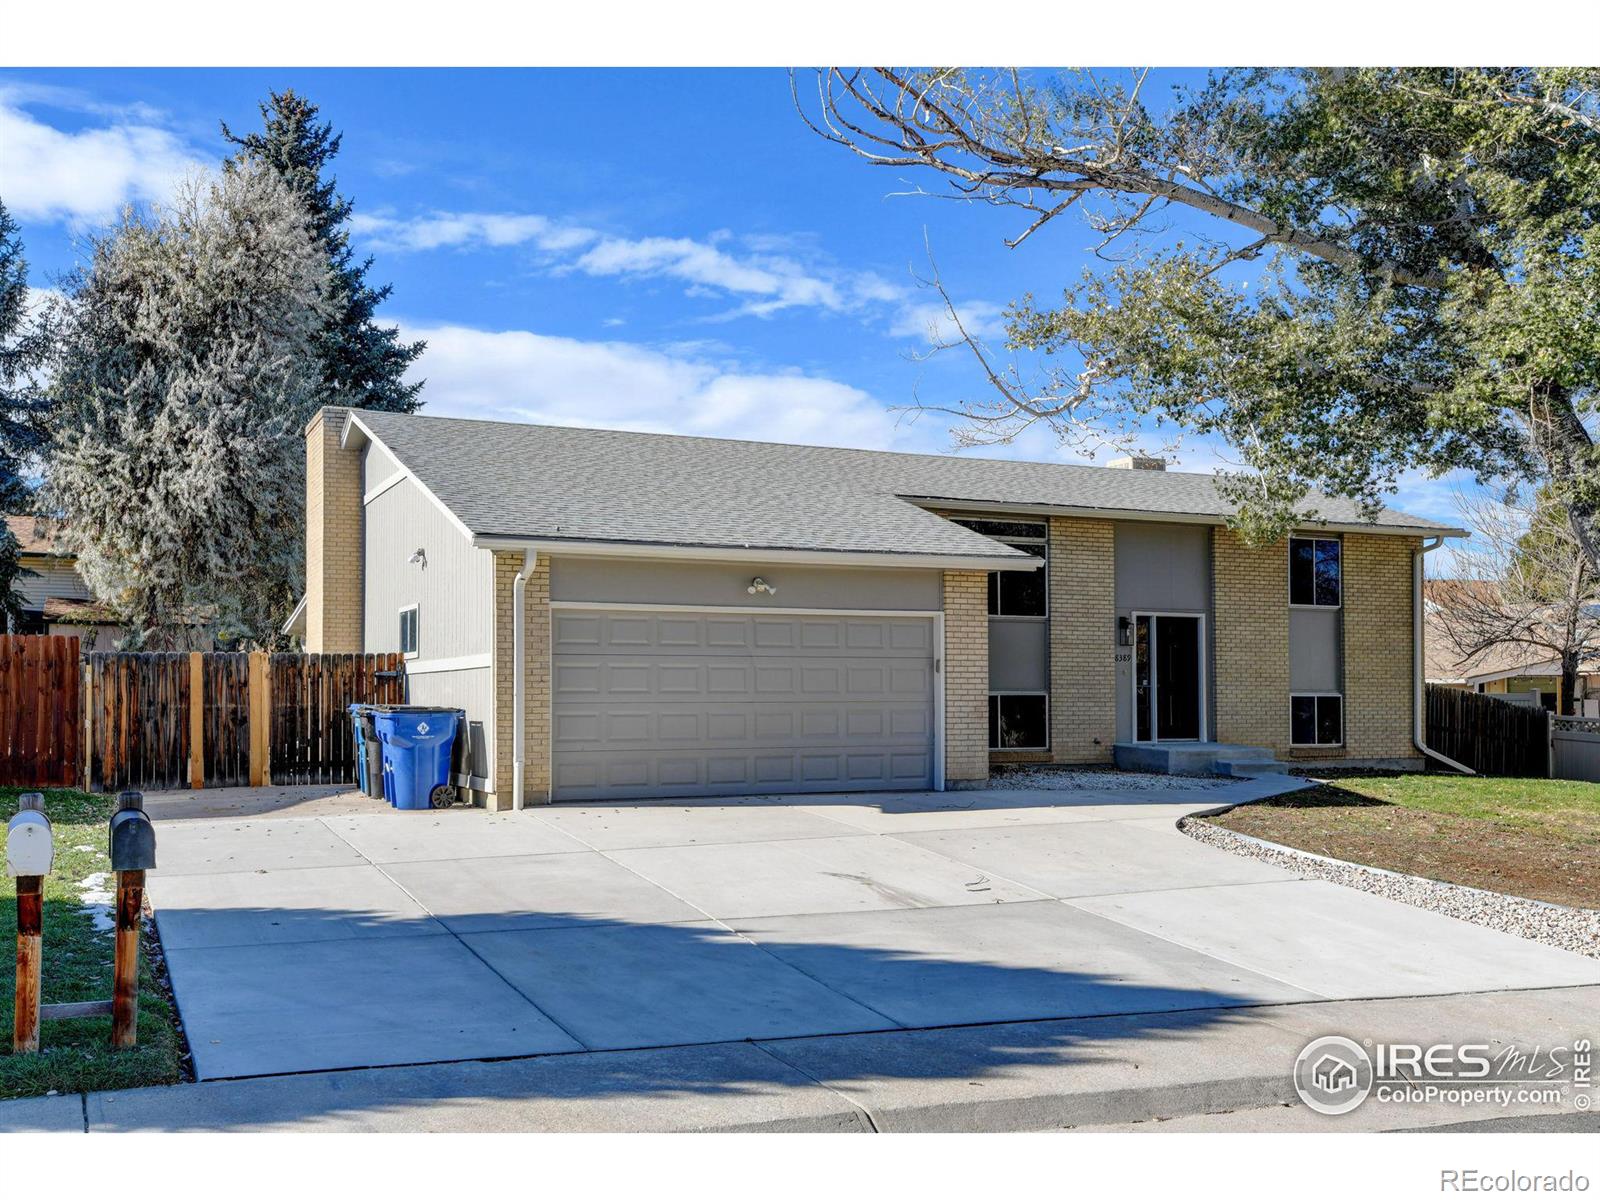 8389  dudley court, Arvada sold home. Closed on 2024-02-27 for $610,000.